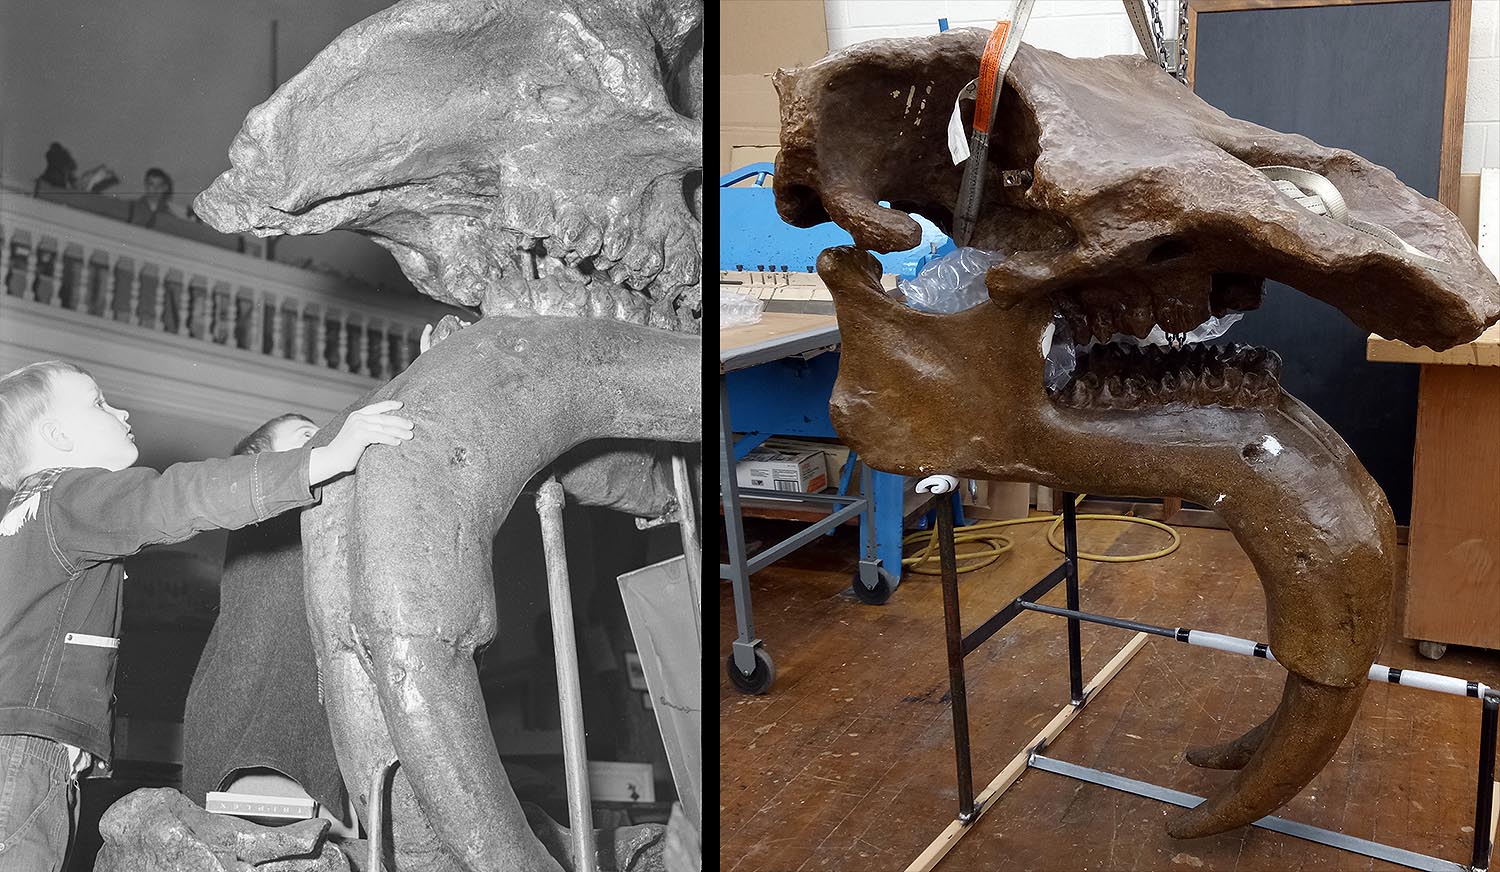 Another planned exhibit is that of the huge skull of a Deinotherium, an extinct elephant-relative with its tusks growing from the lower jaw. The Deinotherium, which was once on display in the Wesleyan Museum, is currently housed in Wesleyan's Machine Shop. It will soon be installed in a hallway in Exley.